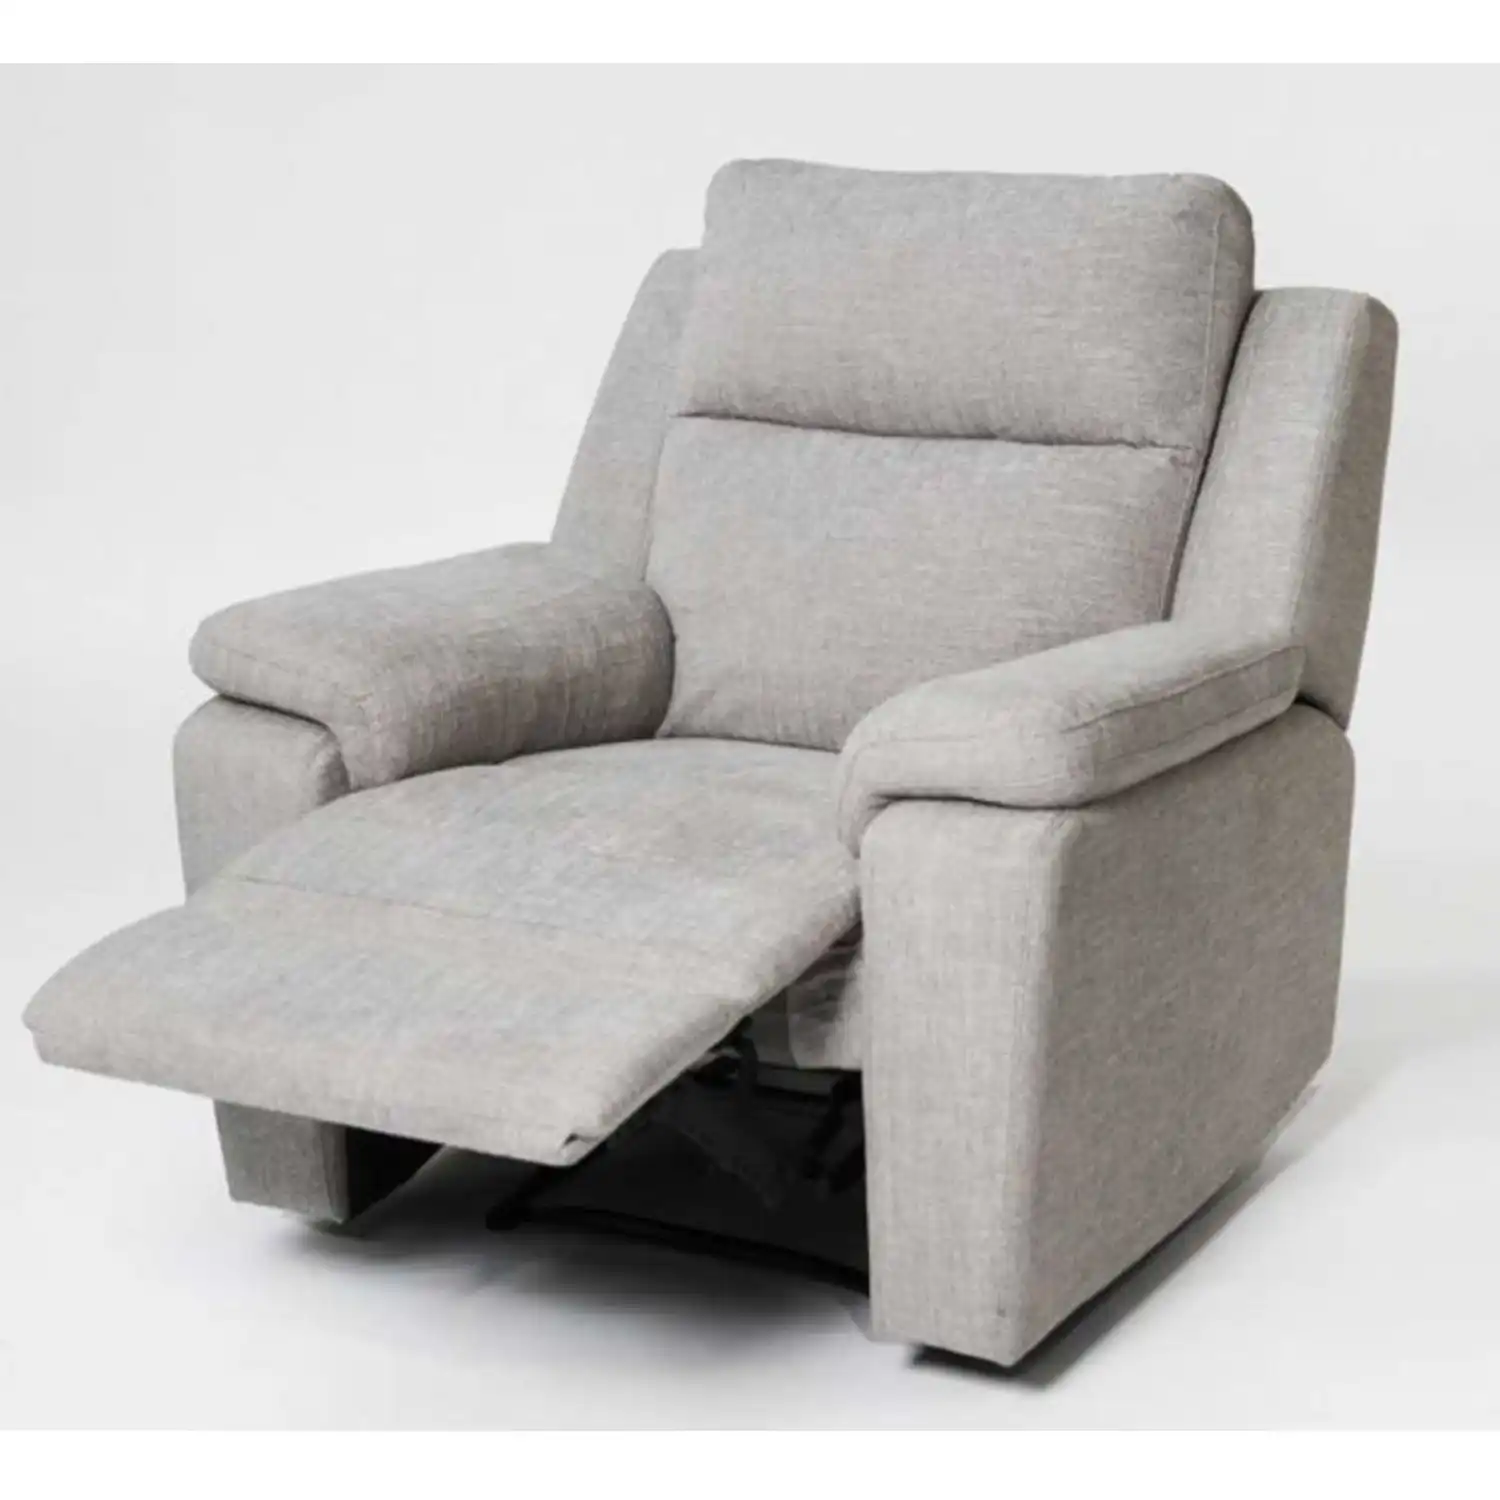 Beige Fabric Padded Manual Recliner Armchair